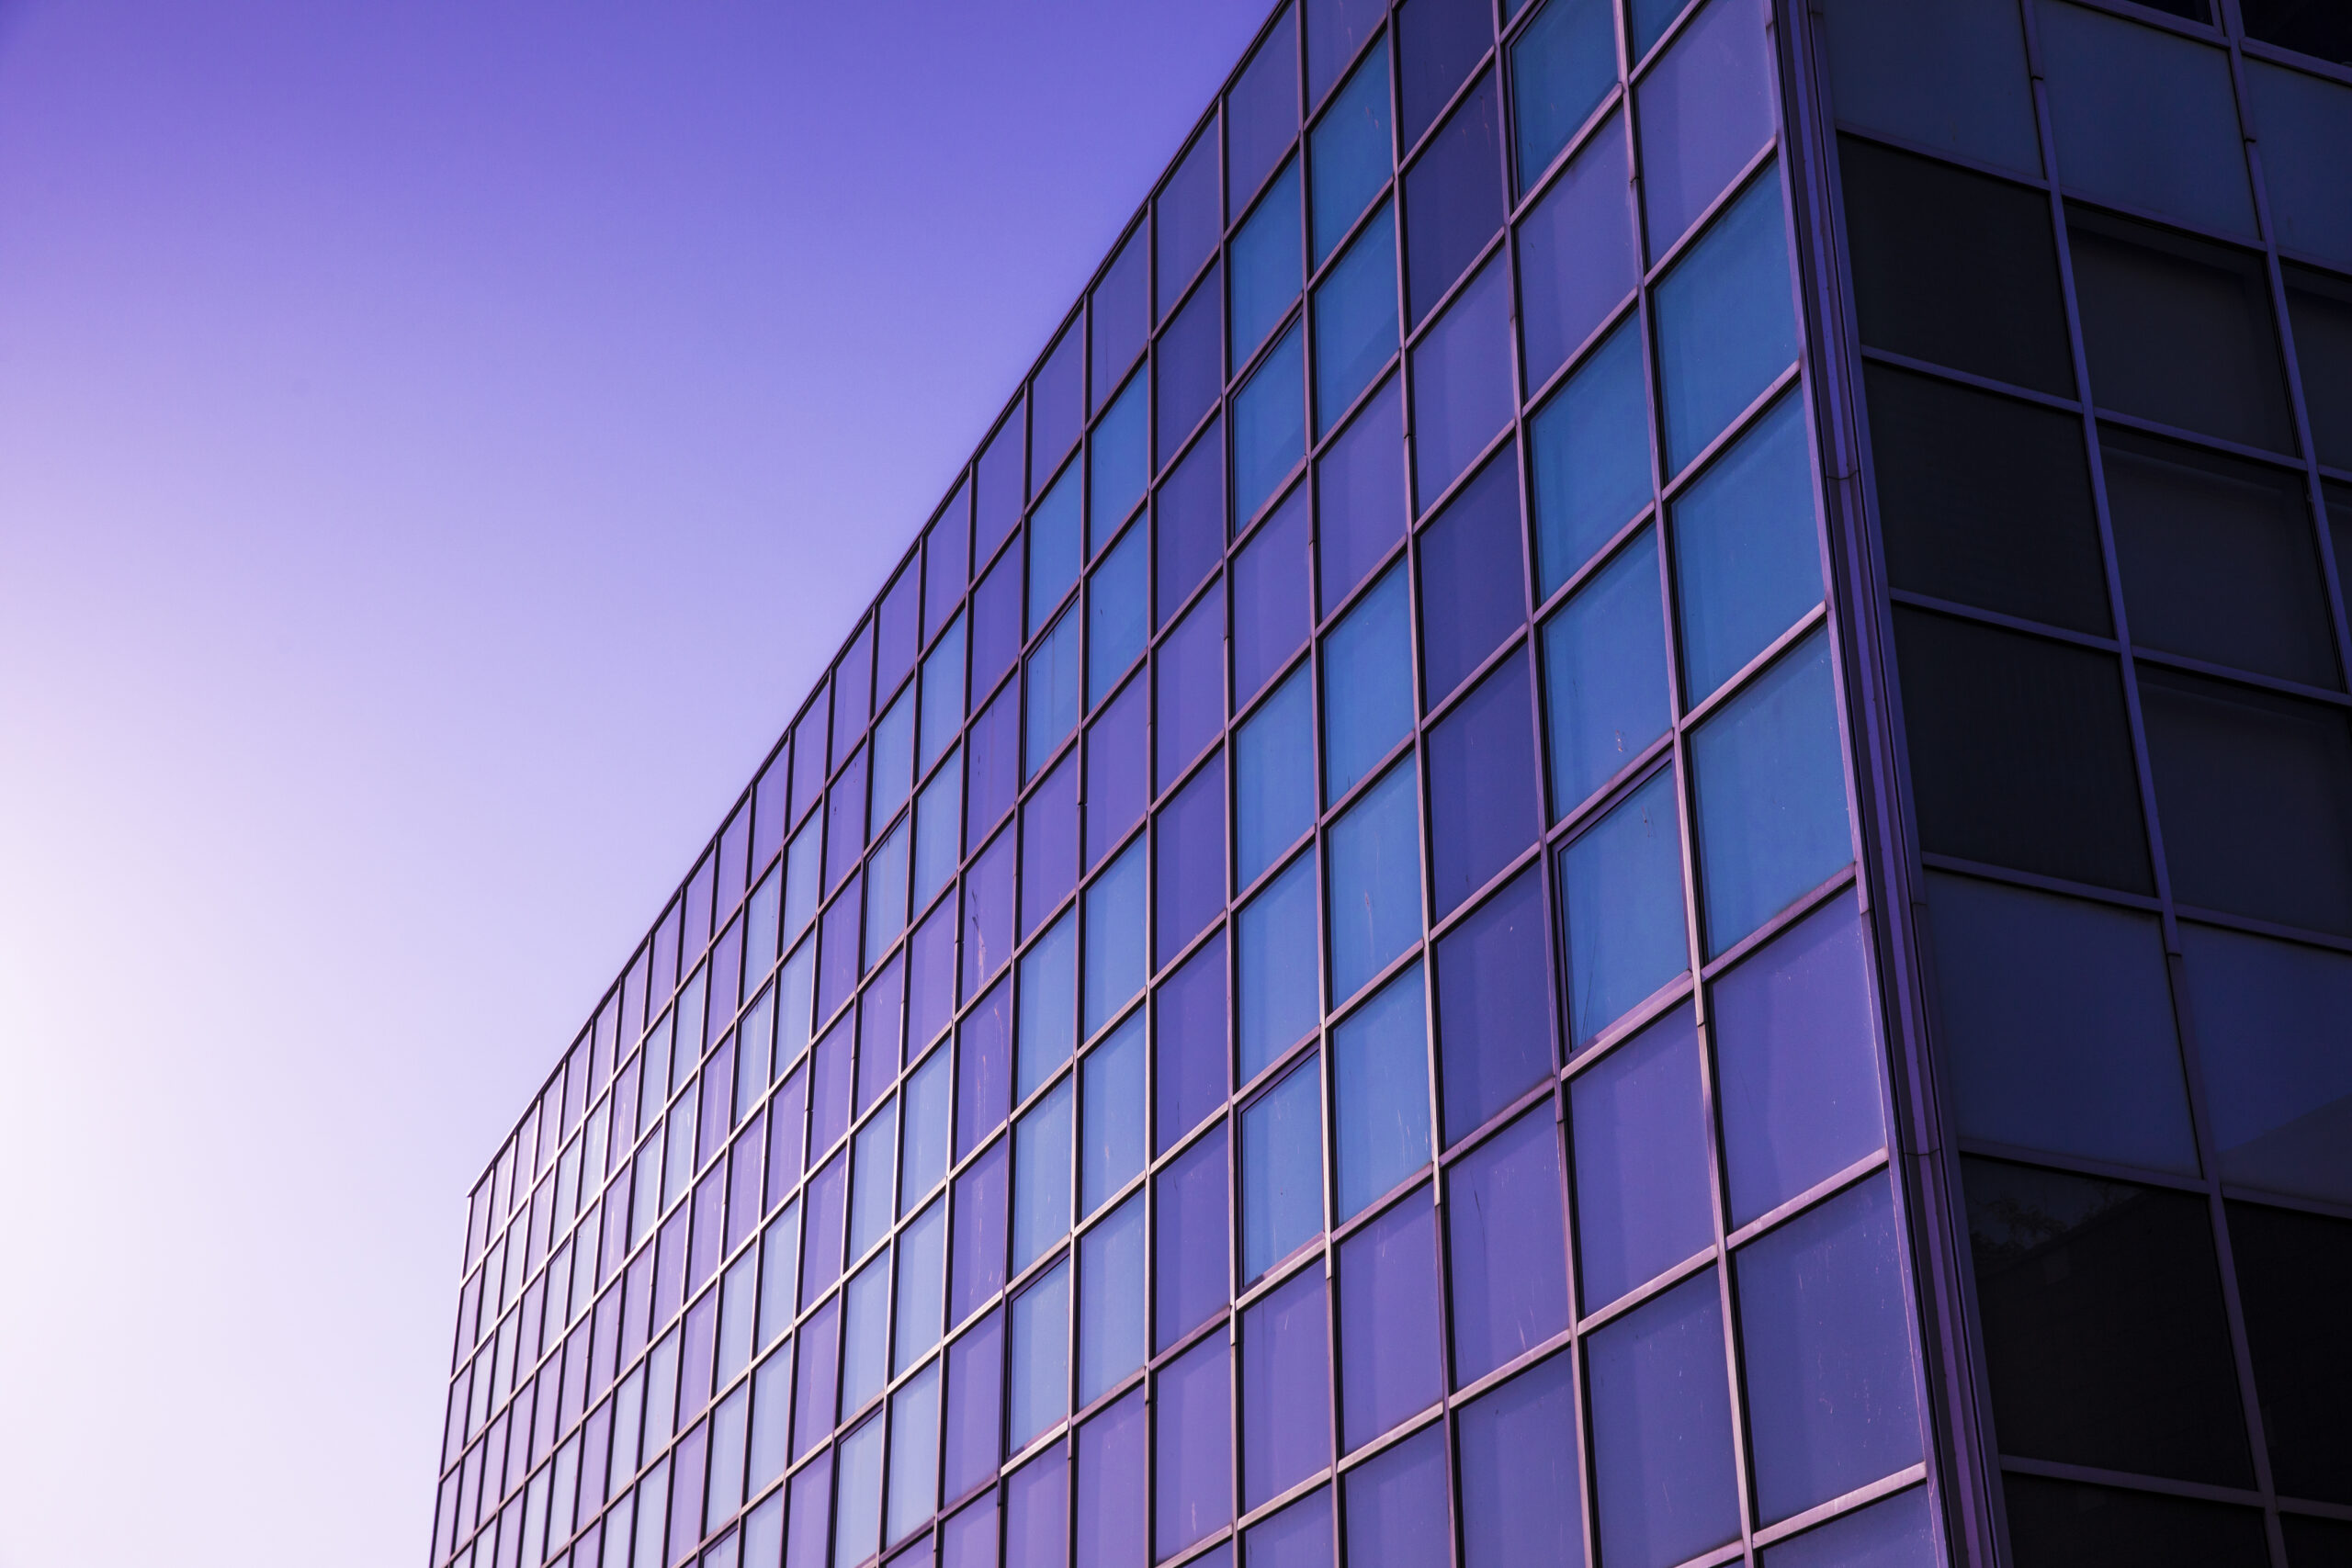 Side of building with many windows with a purple hue